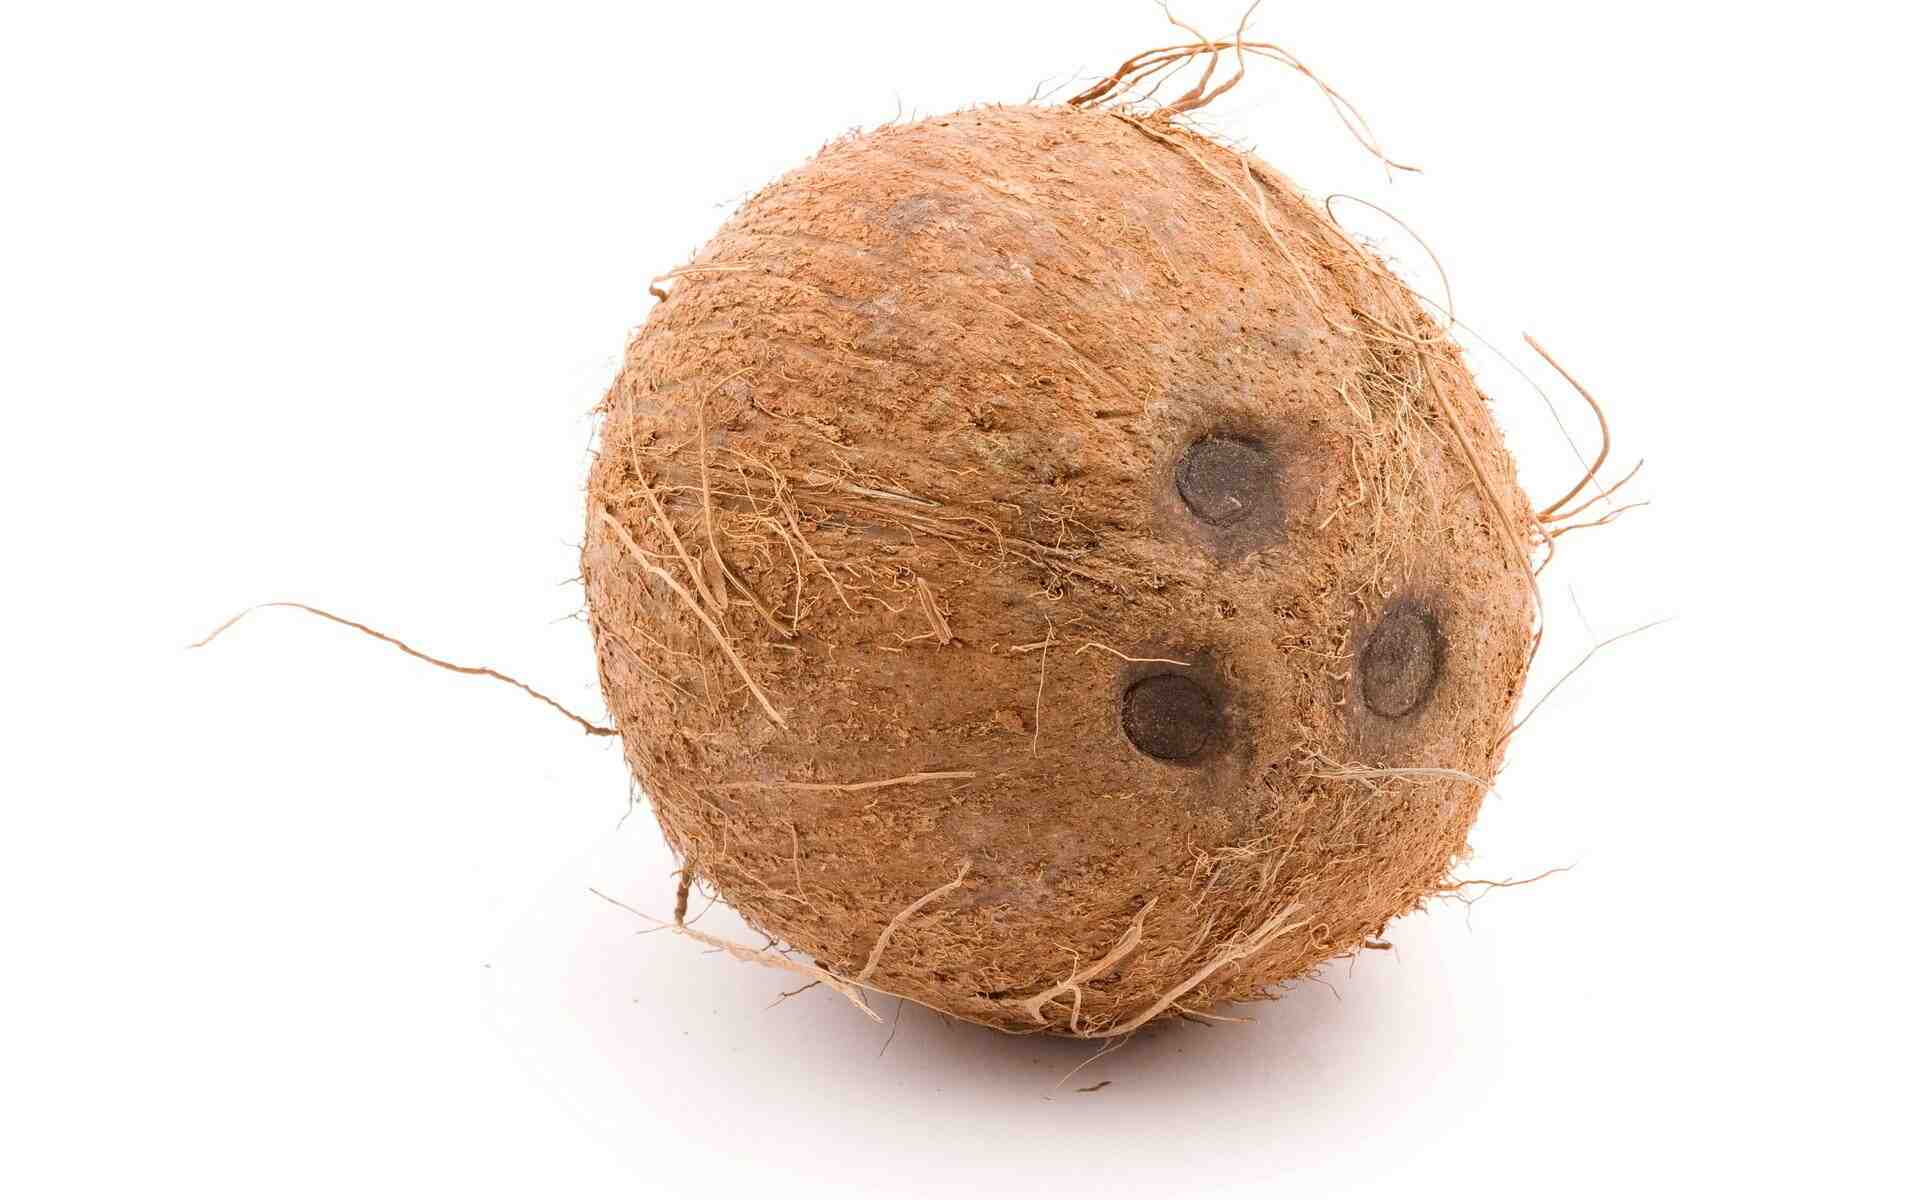 Why does a coconut have eyes?